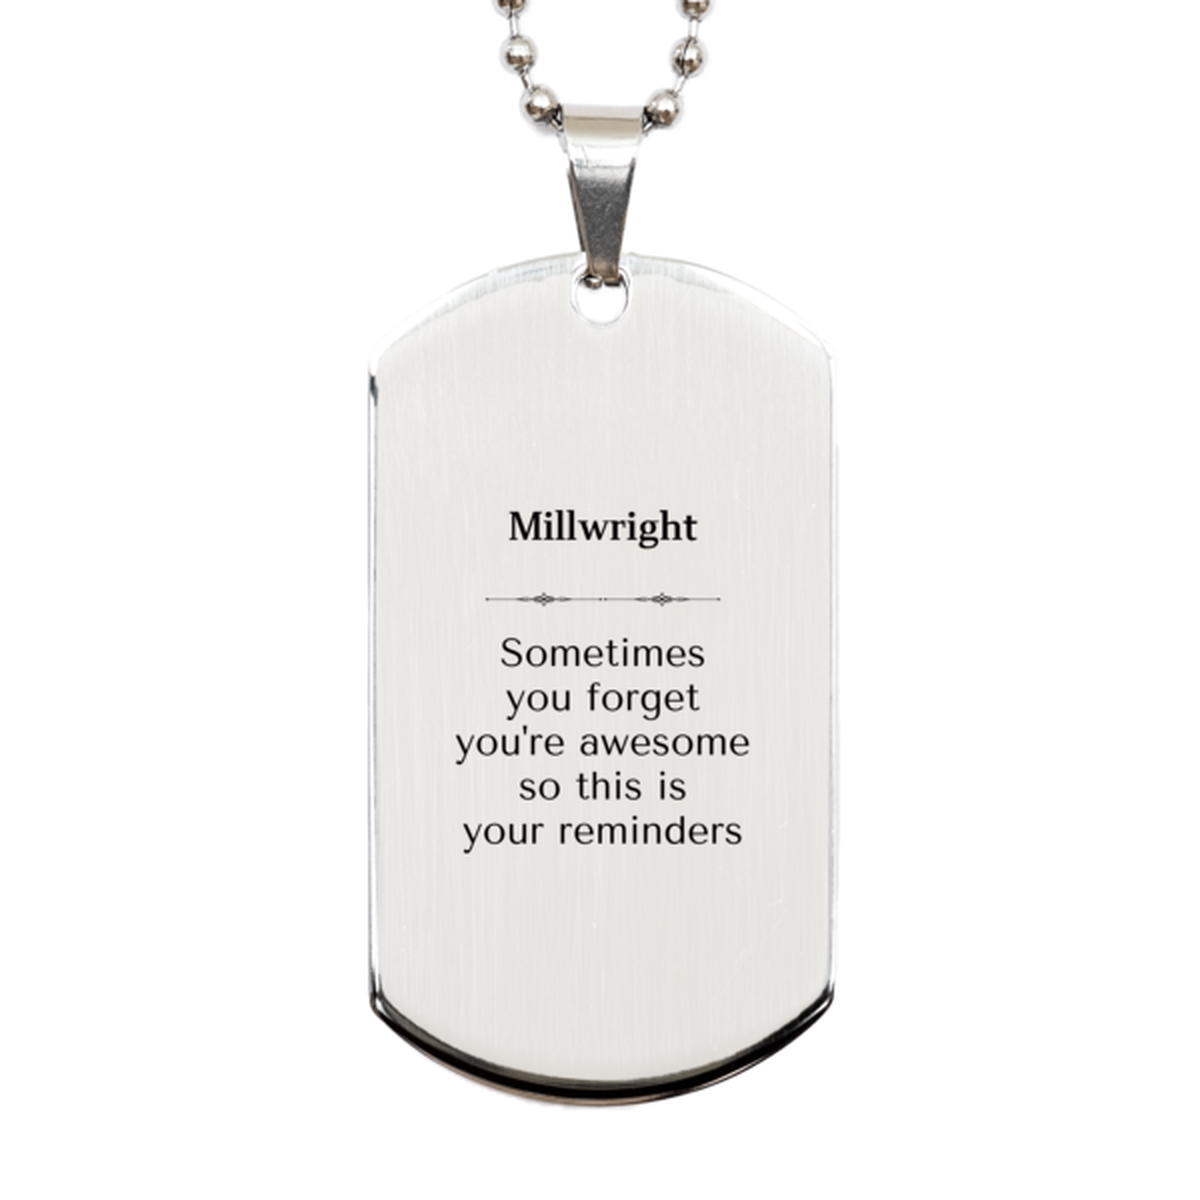 Sentimental Millwright Silver Dog Tag, Millwright Sometimes you forget you're awesome so this is your reminders, Graduation Christmas Birthday Gifts for Millwright, Men, Women, Coworkers